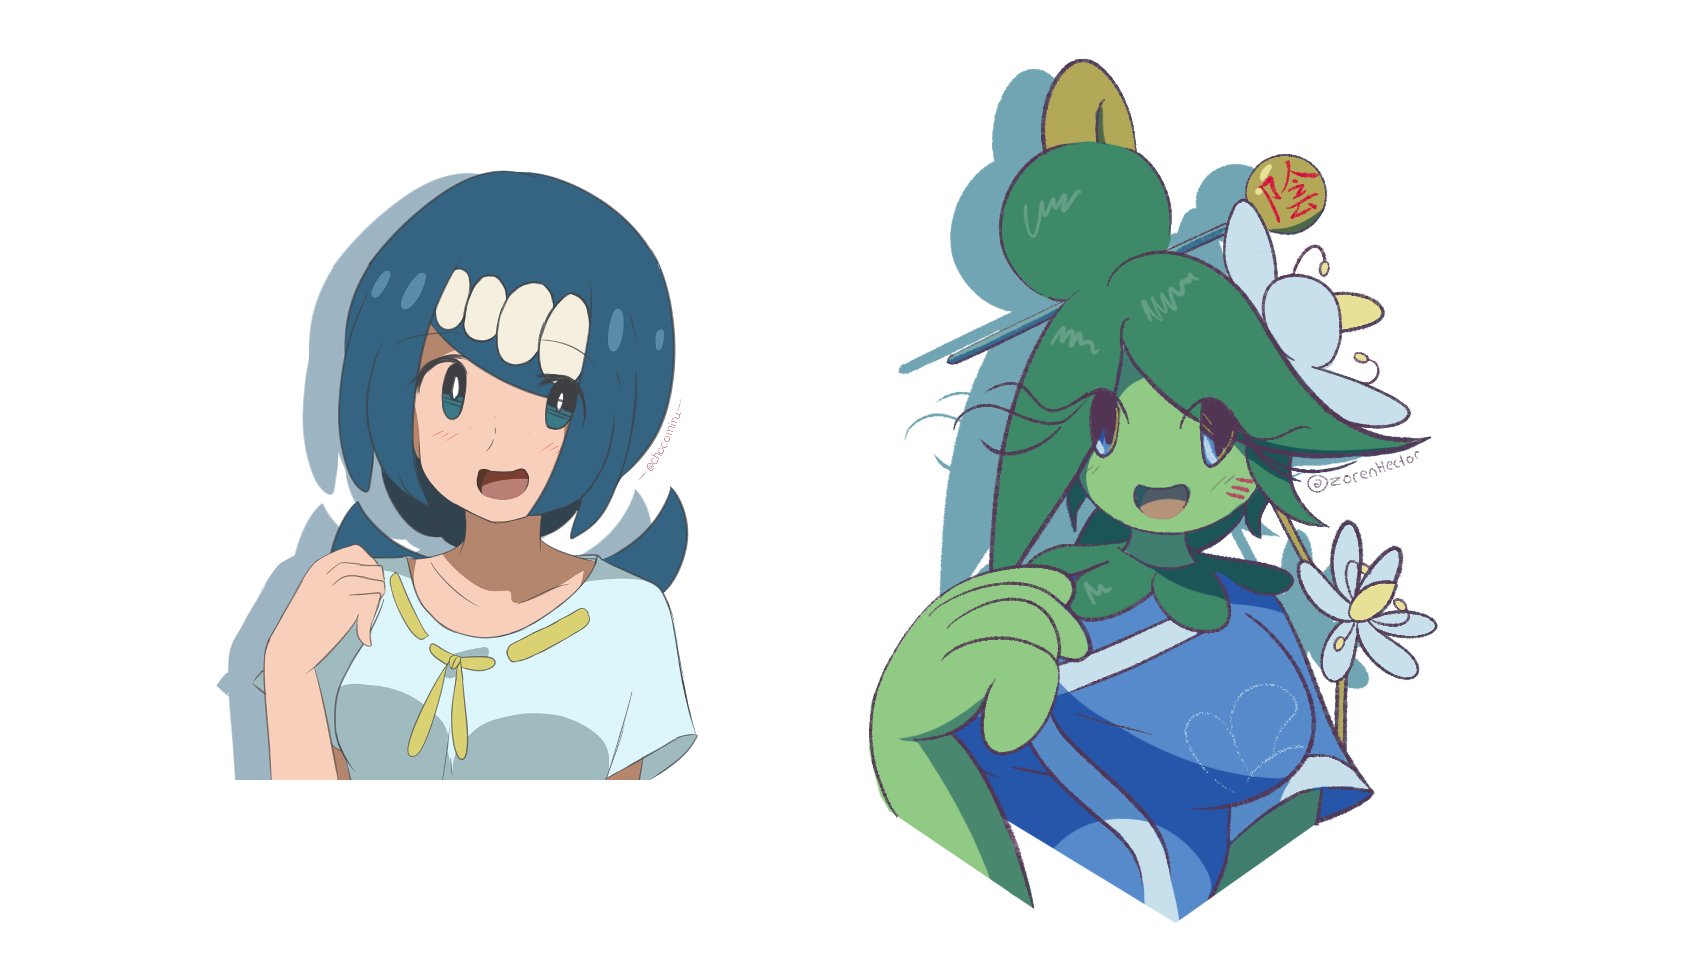 ZorenHector on X: My illustration is inspired after this artwork of Lana's  Mother from Pokemon. Why? This was posted on a discord server and felt  urged to replicate it. My plant reminds